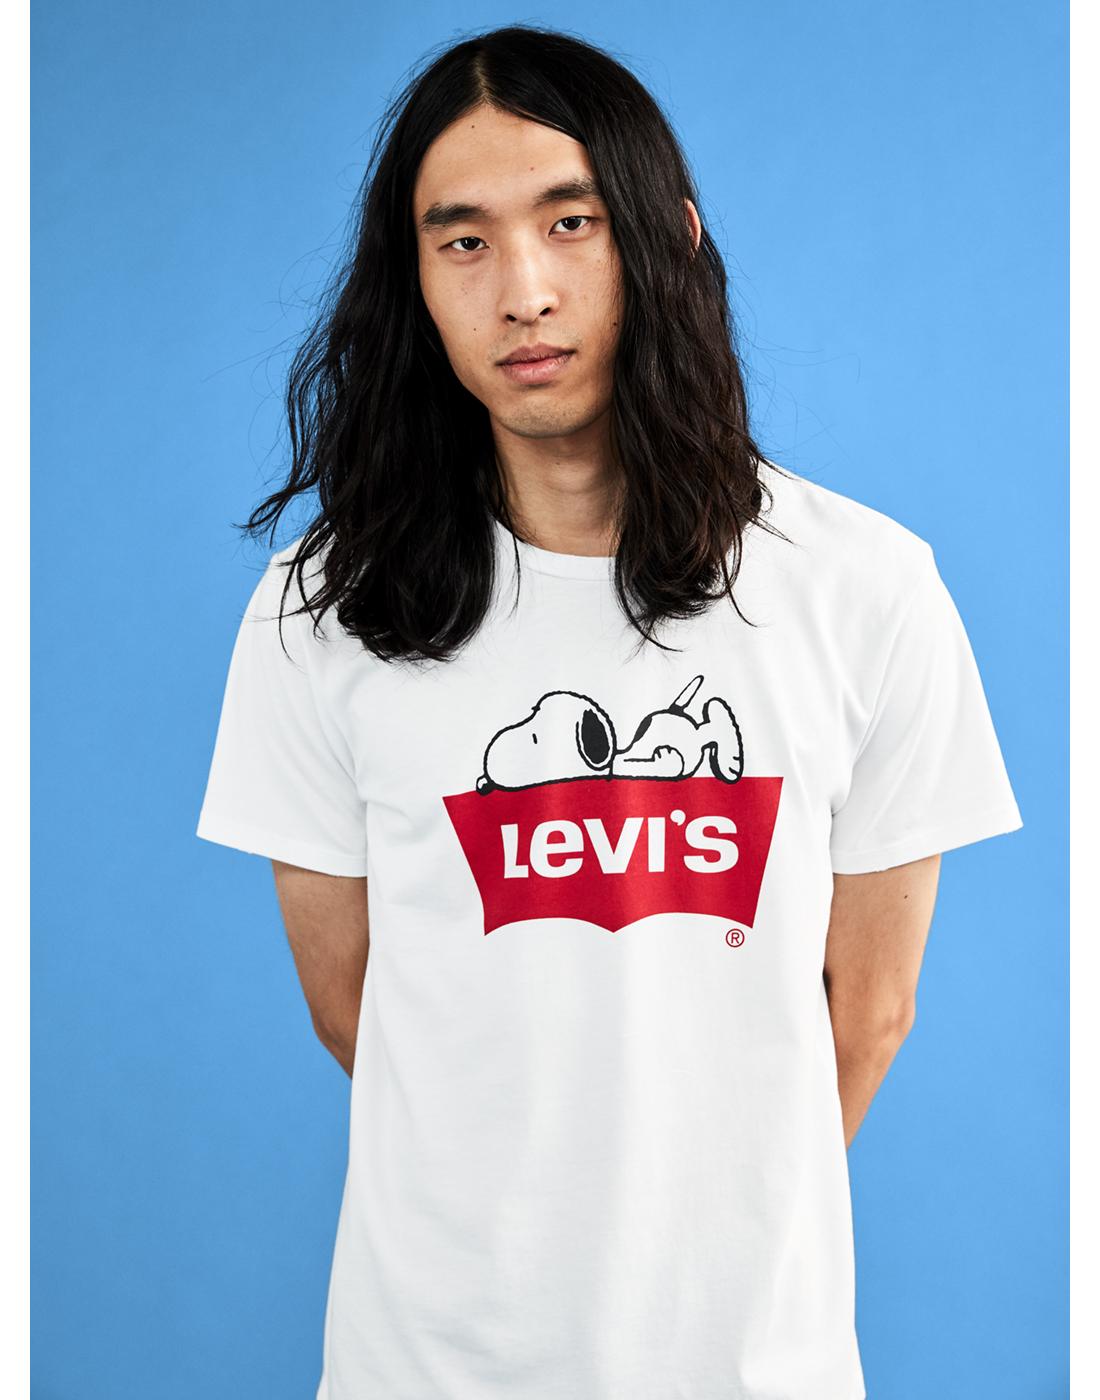 levis t shirt snoopy